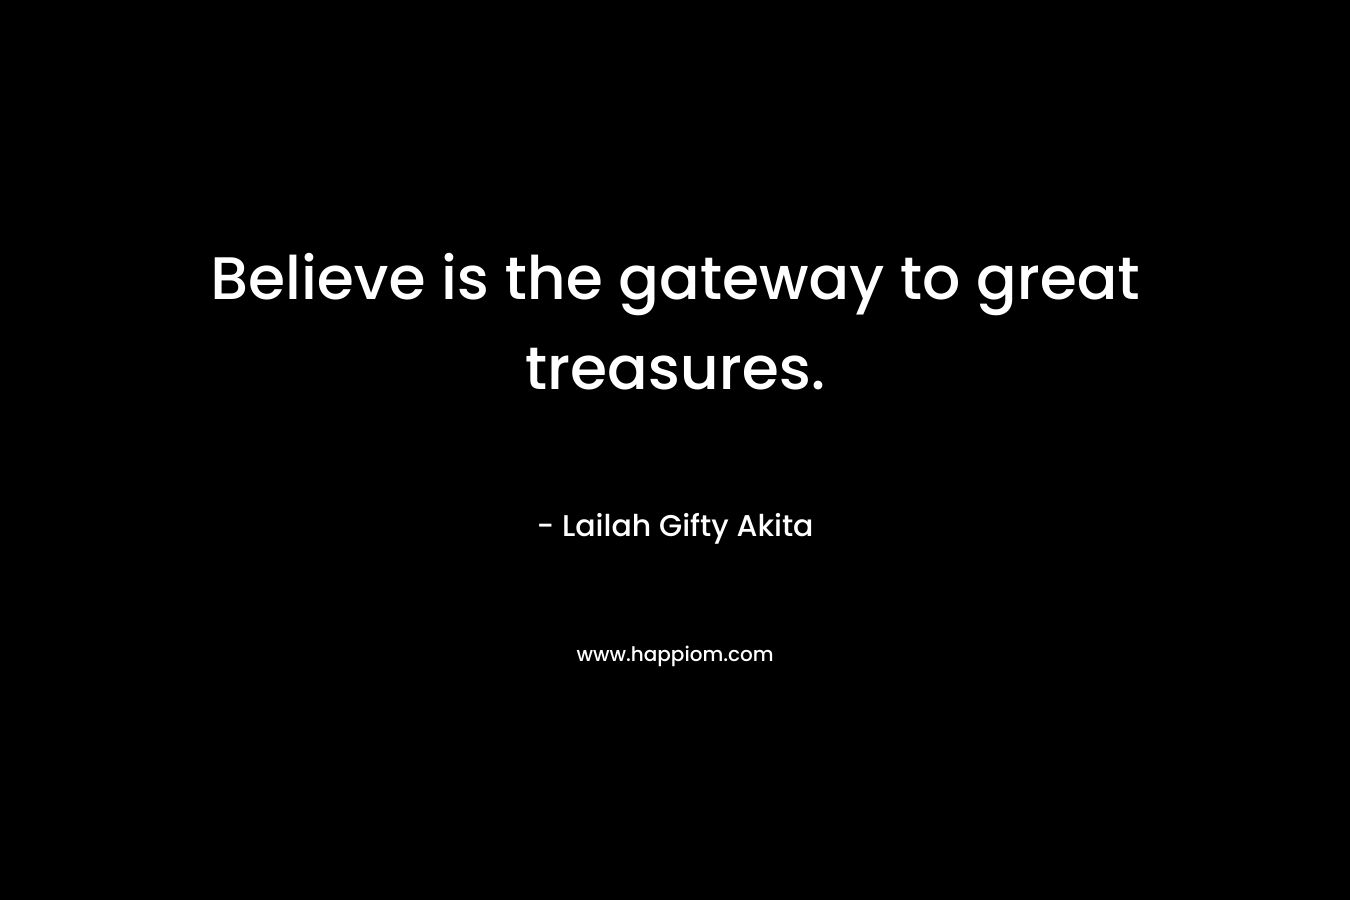 Believe is the gateway to great treasures. – Lailah Gifty Akita